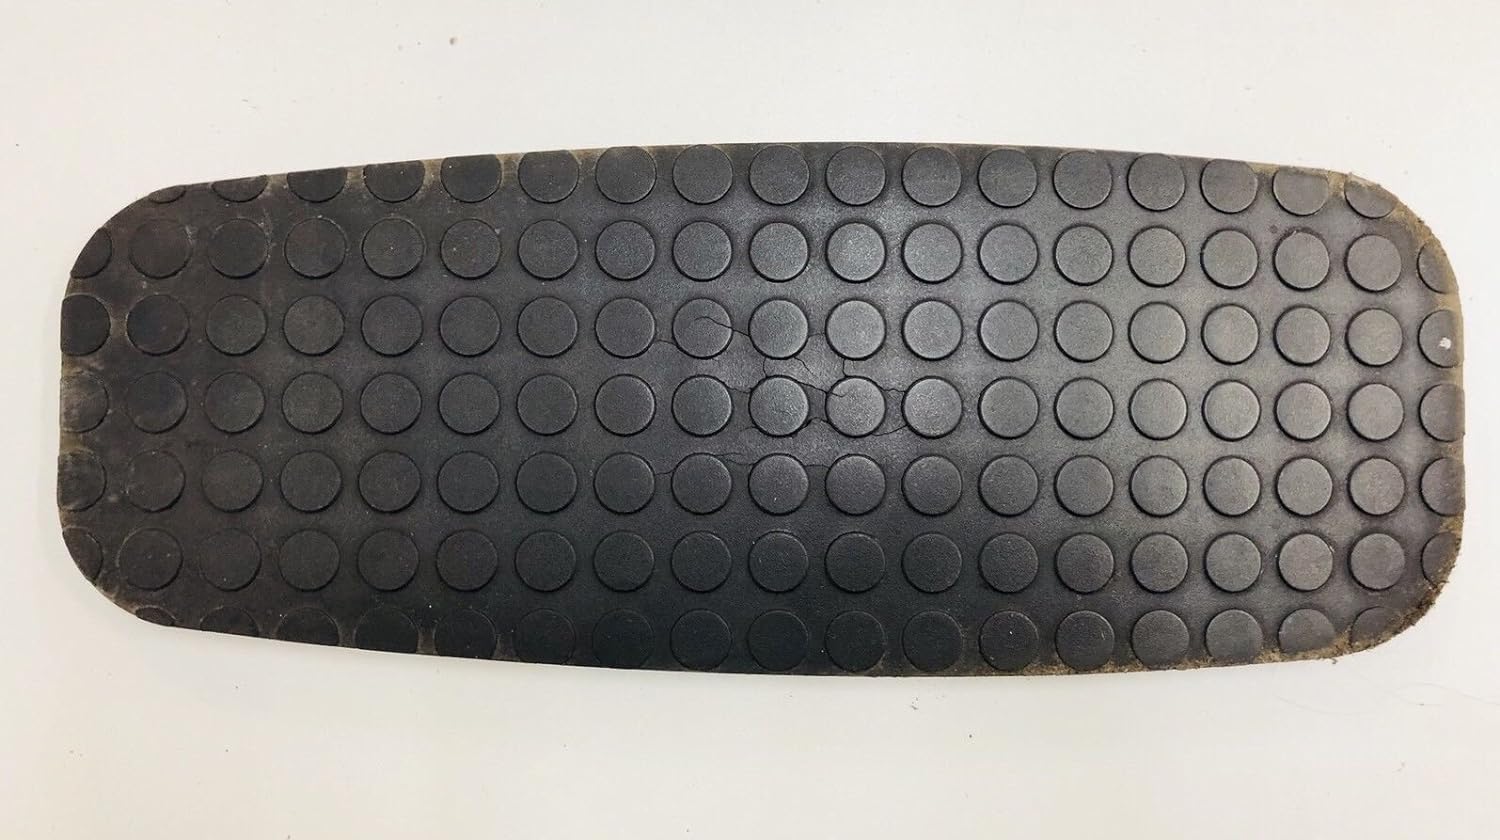 Foot Pedal Rubber Pad